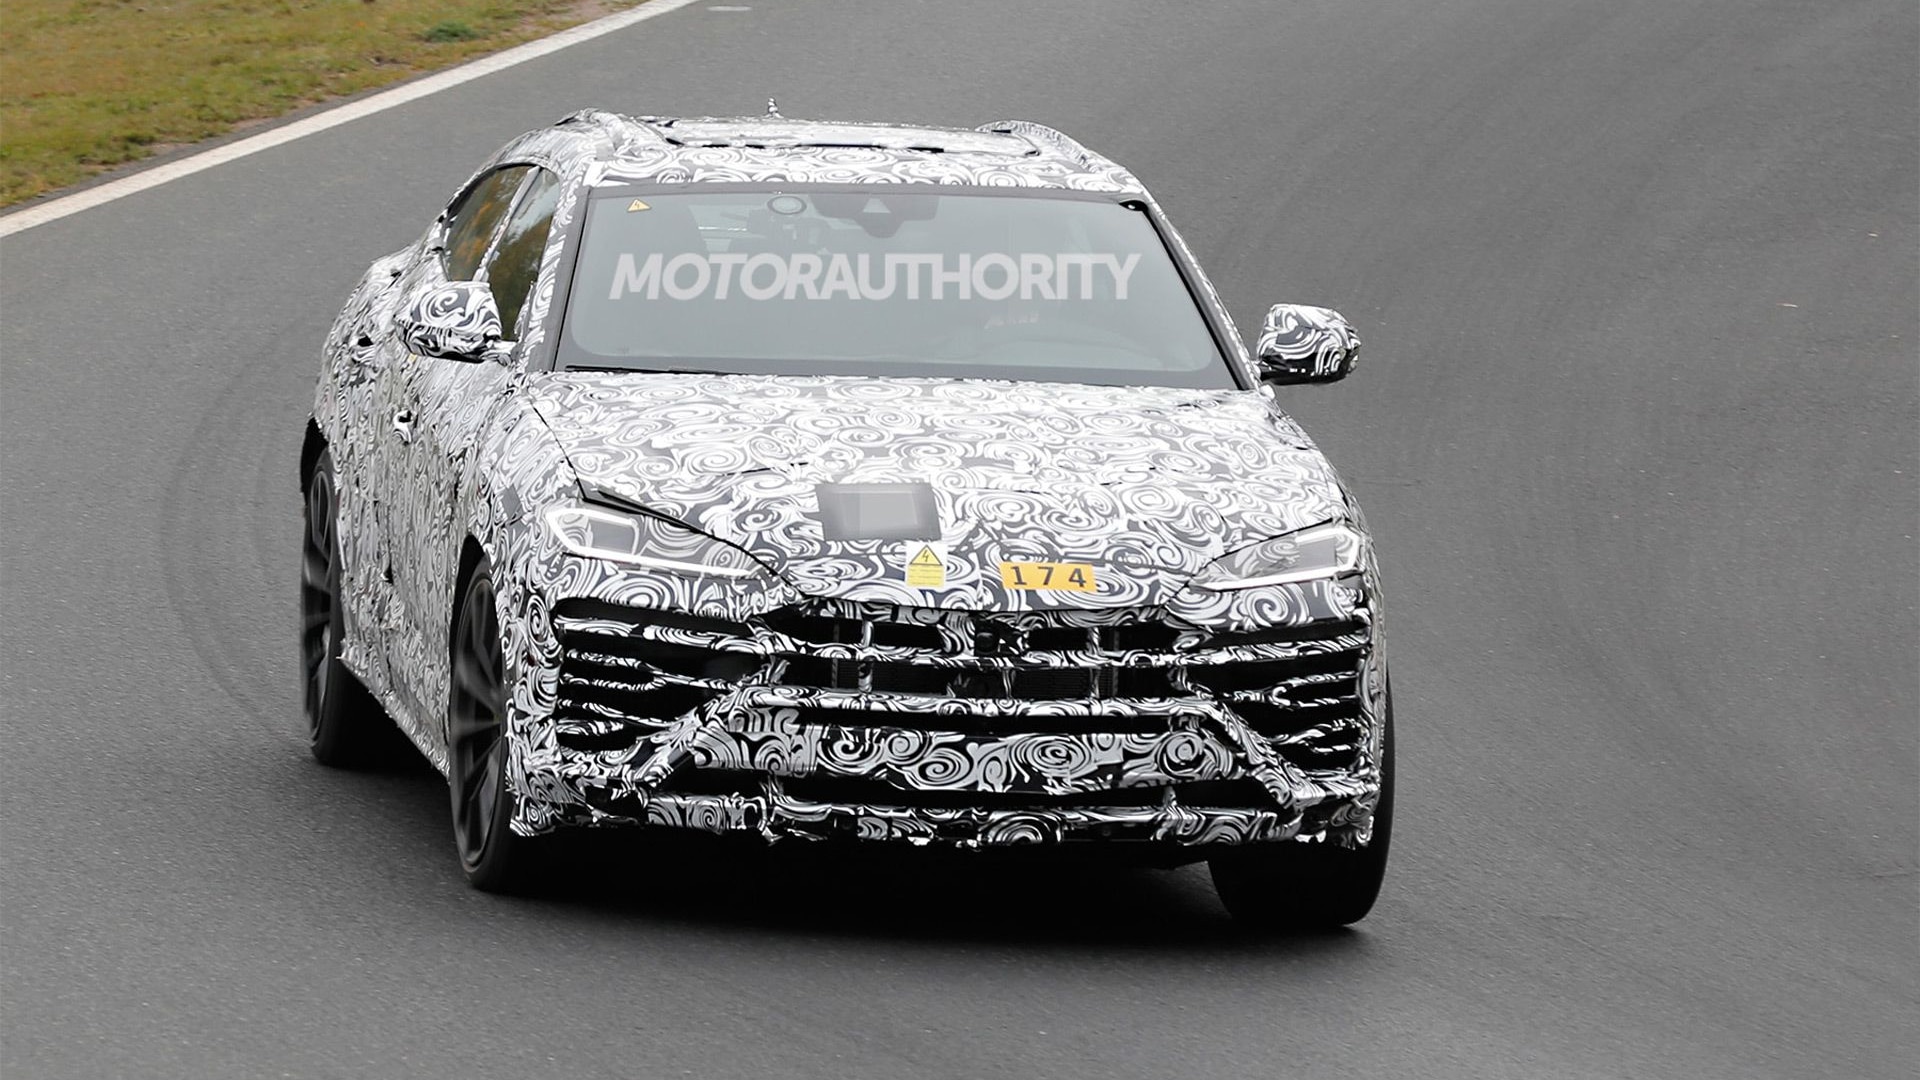 2025 Lamborghini Urus Sports Updated Styling Inside And Out As Well As PHEV  Power